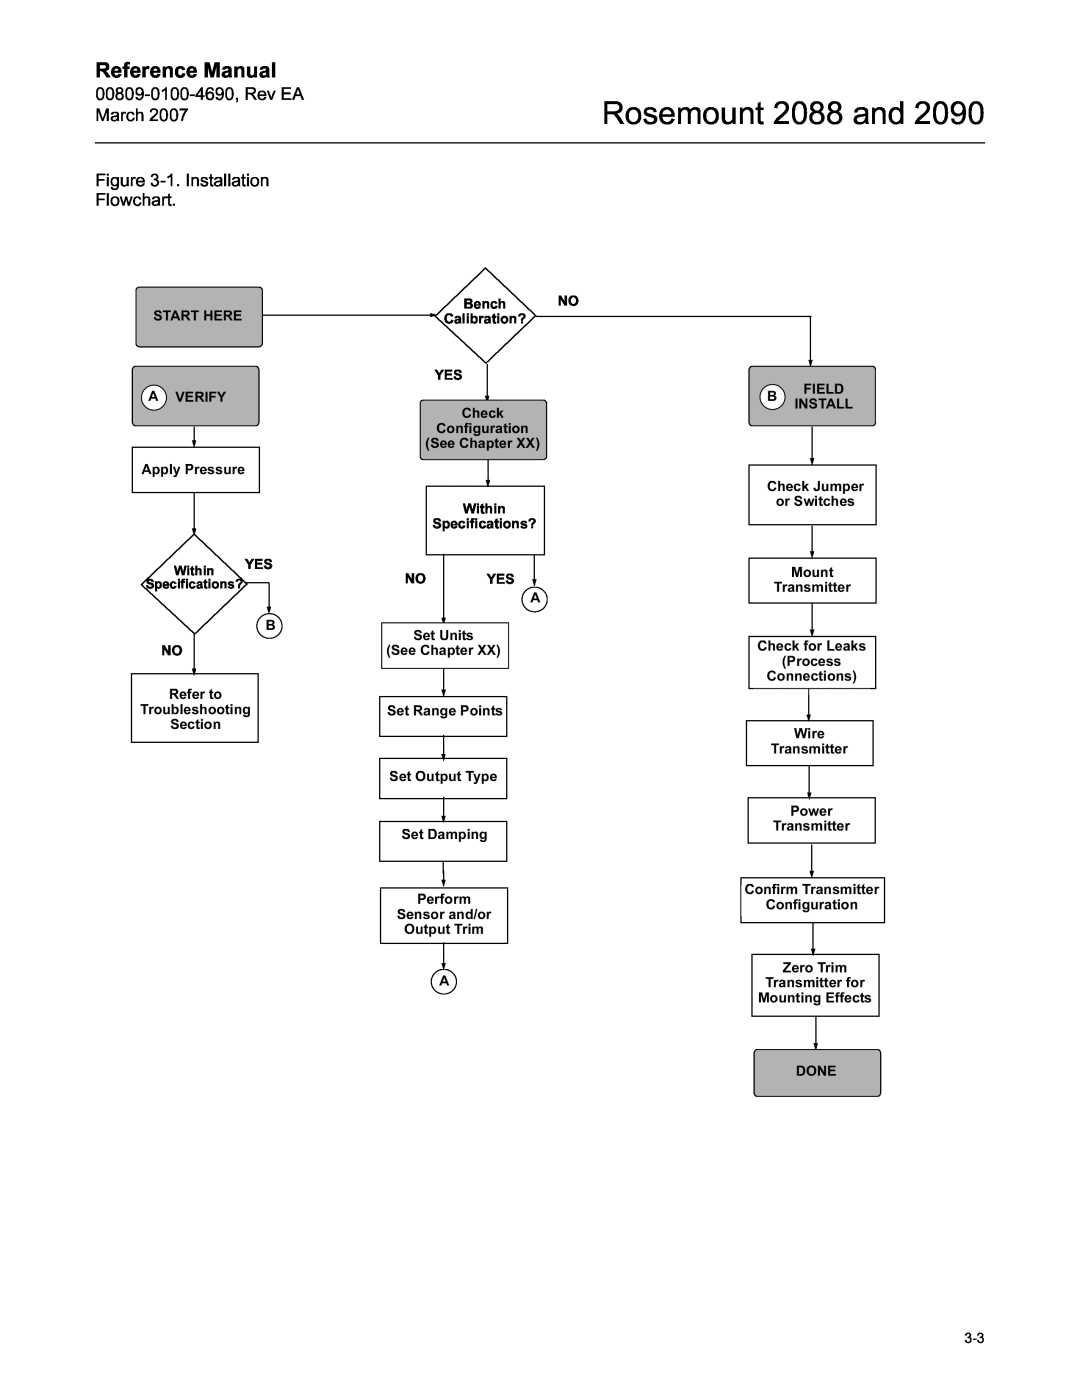 Emerson Process Management Rosemount 2088 and, Reference Manual, 00809-0100-4690,Rev EA March, 1.Installation Flowchart 